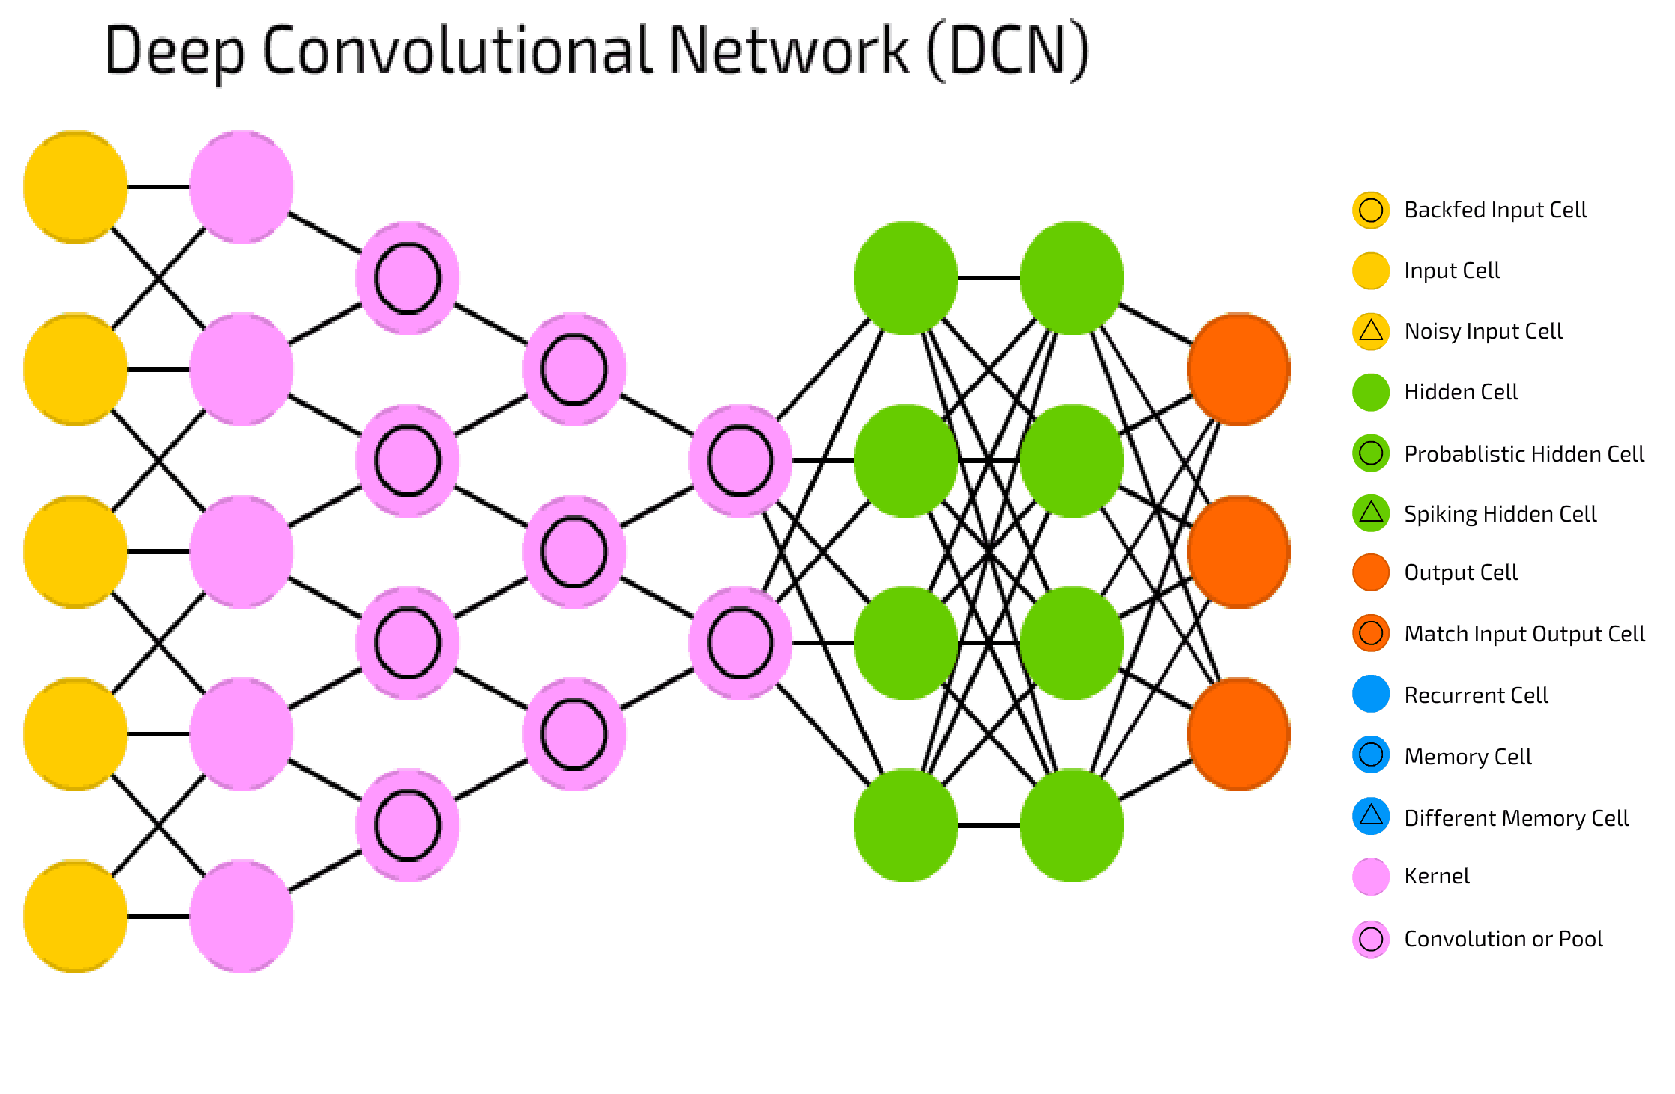 The Deep Convolutional Neural Network Architecture Adapted From 11